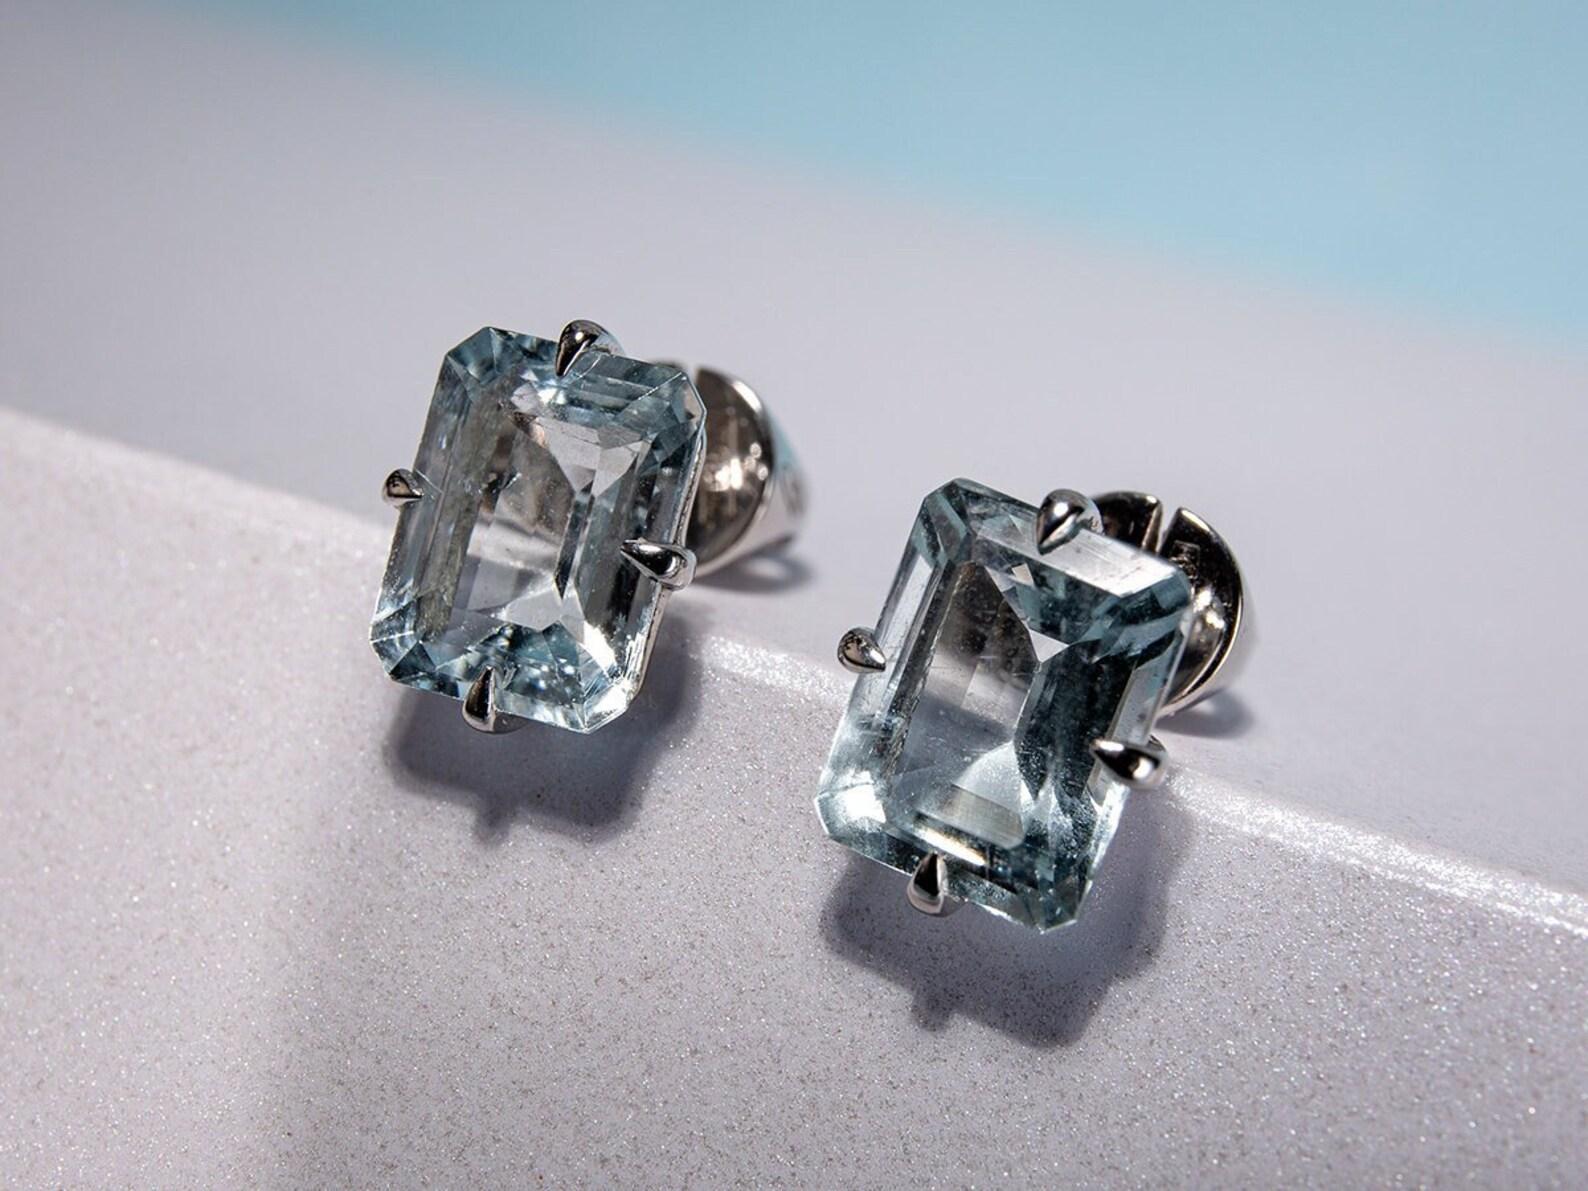 Silver stud earrings with natural Aquamarine in classic emerald cut
aquamarine origin - Brazil
aquamarine measurements - 0.28 x 0.35 in / 7 x 9 mm
earrings weight - 2.86 grams
total weight of the stones - 4.2 ct